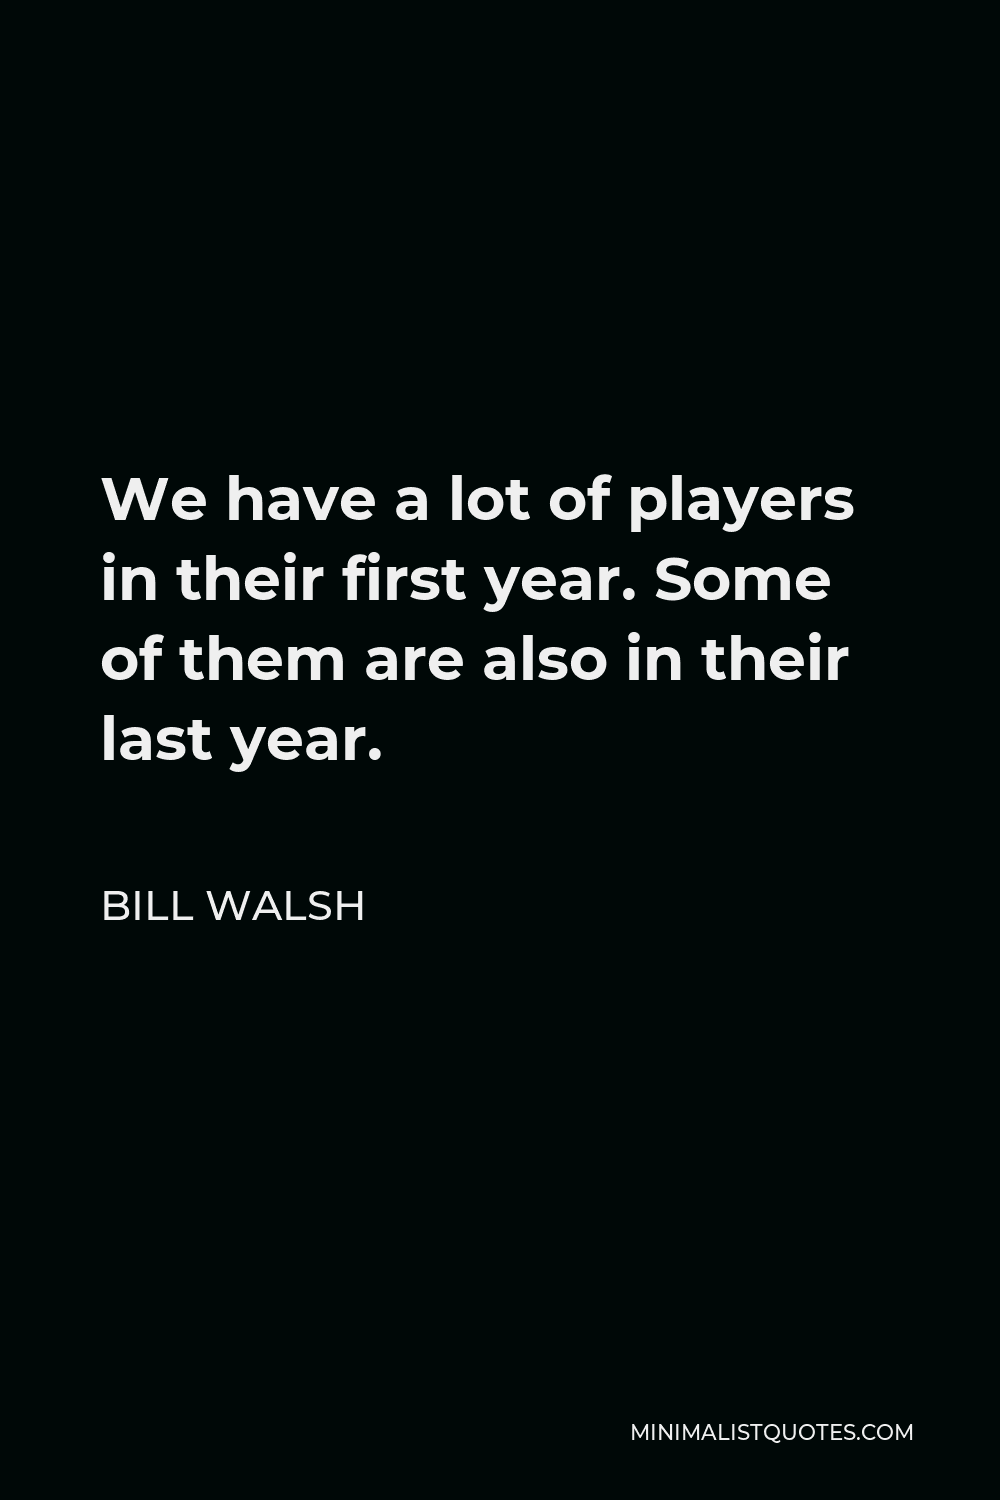 Bill Walsh Quote - We have a lot of players in their first year. Some of them are also in their last year.